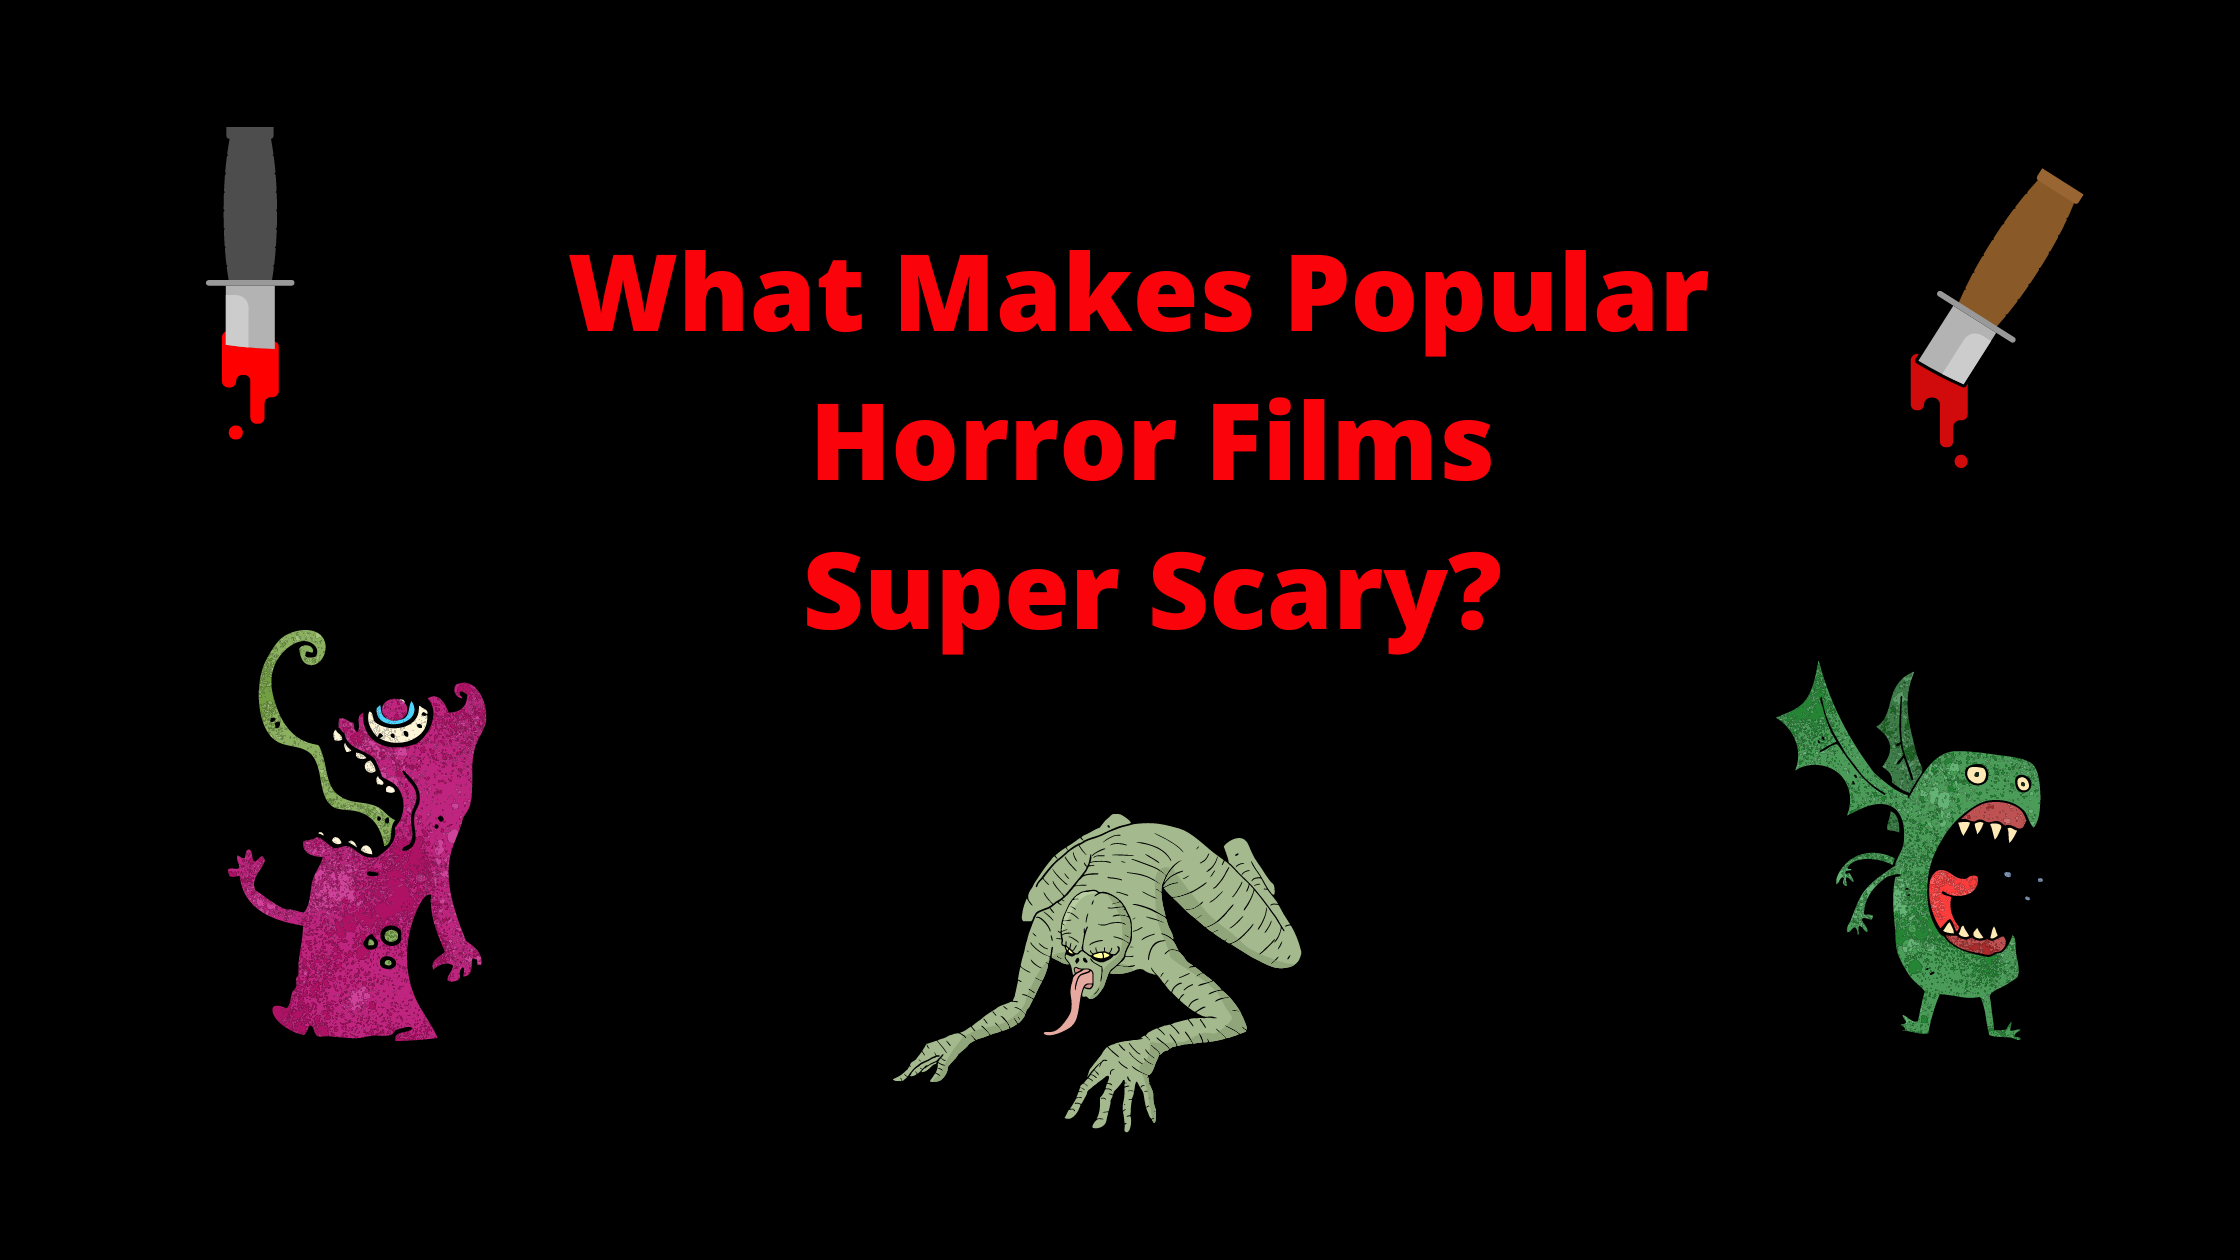 What Makes Popular Horror Films Super Scary